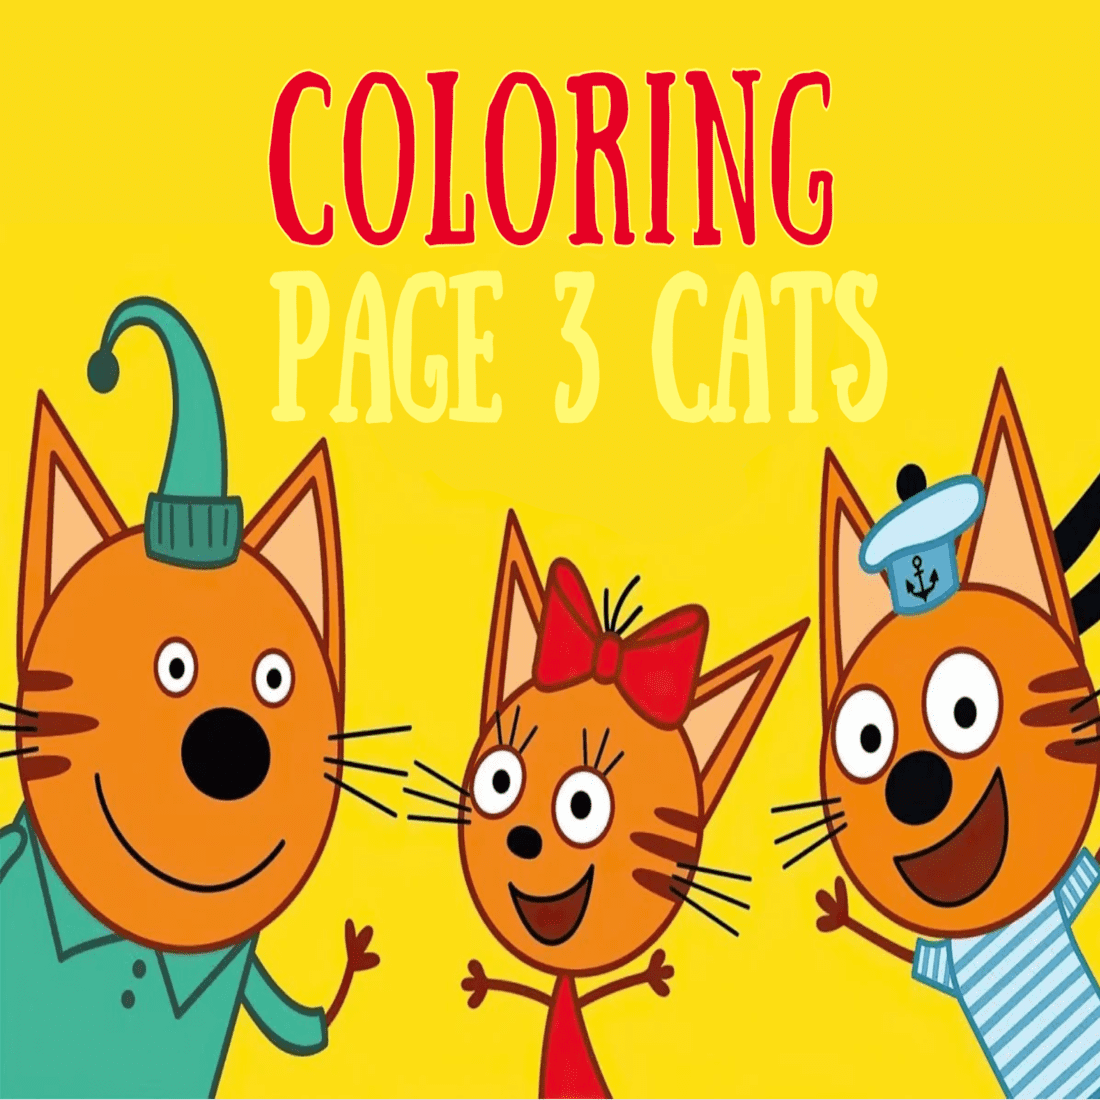 The Three Cats Coloring Book cover image.